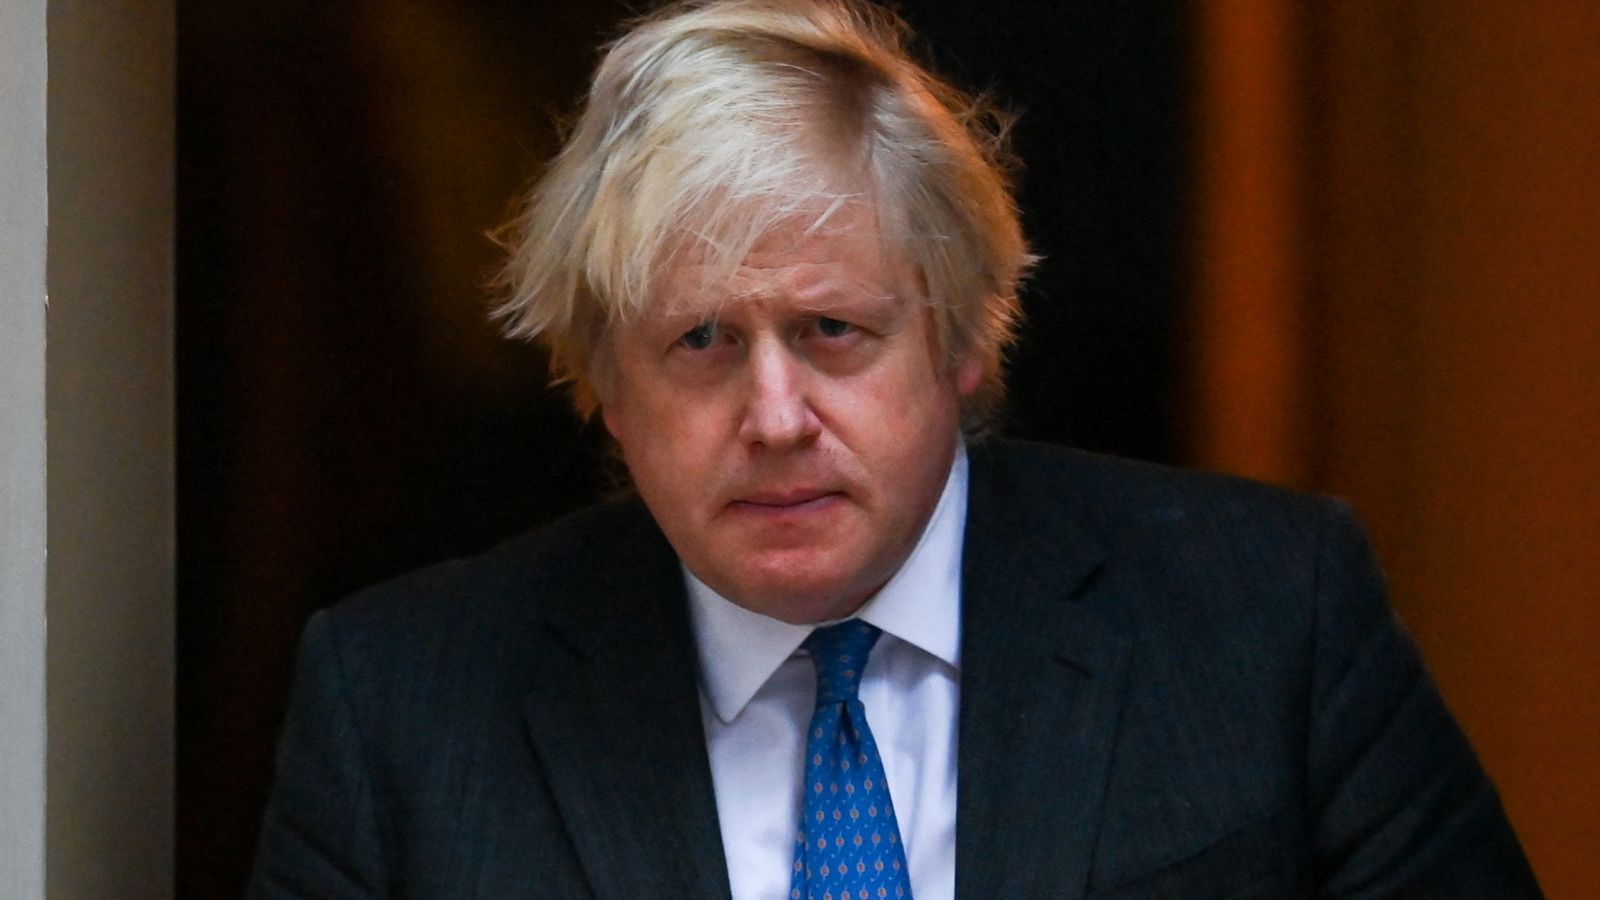 Downing Street parties: Boris Johnson faces further calls to resign over partygate as reports claim 'mass clearout' of Number 10 team - Sky News